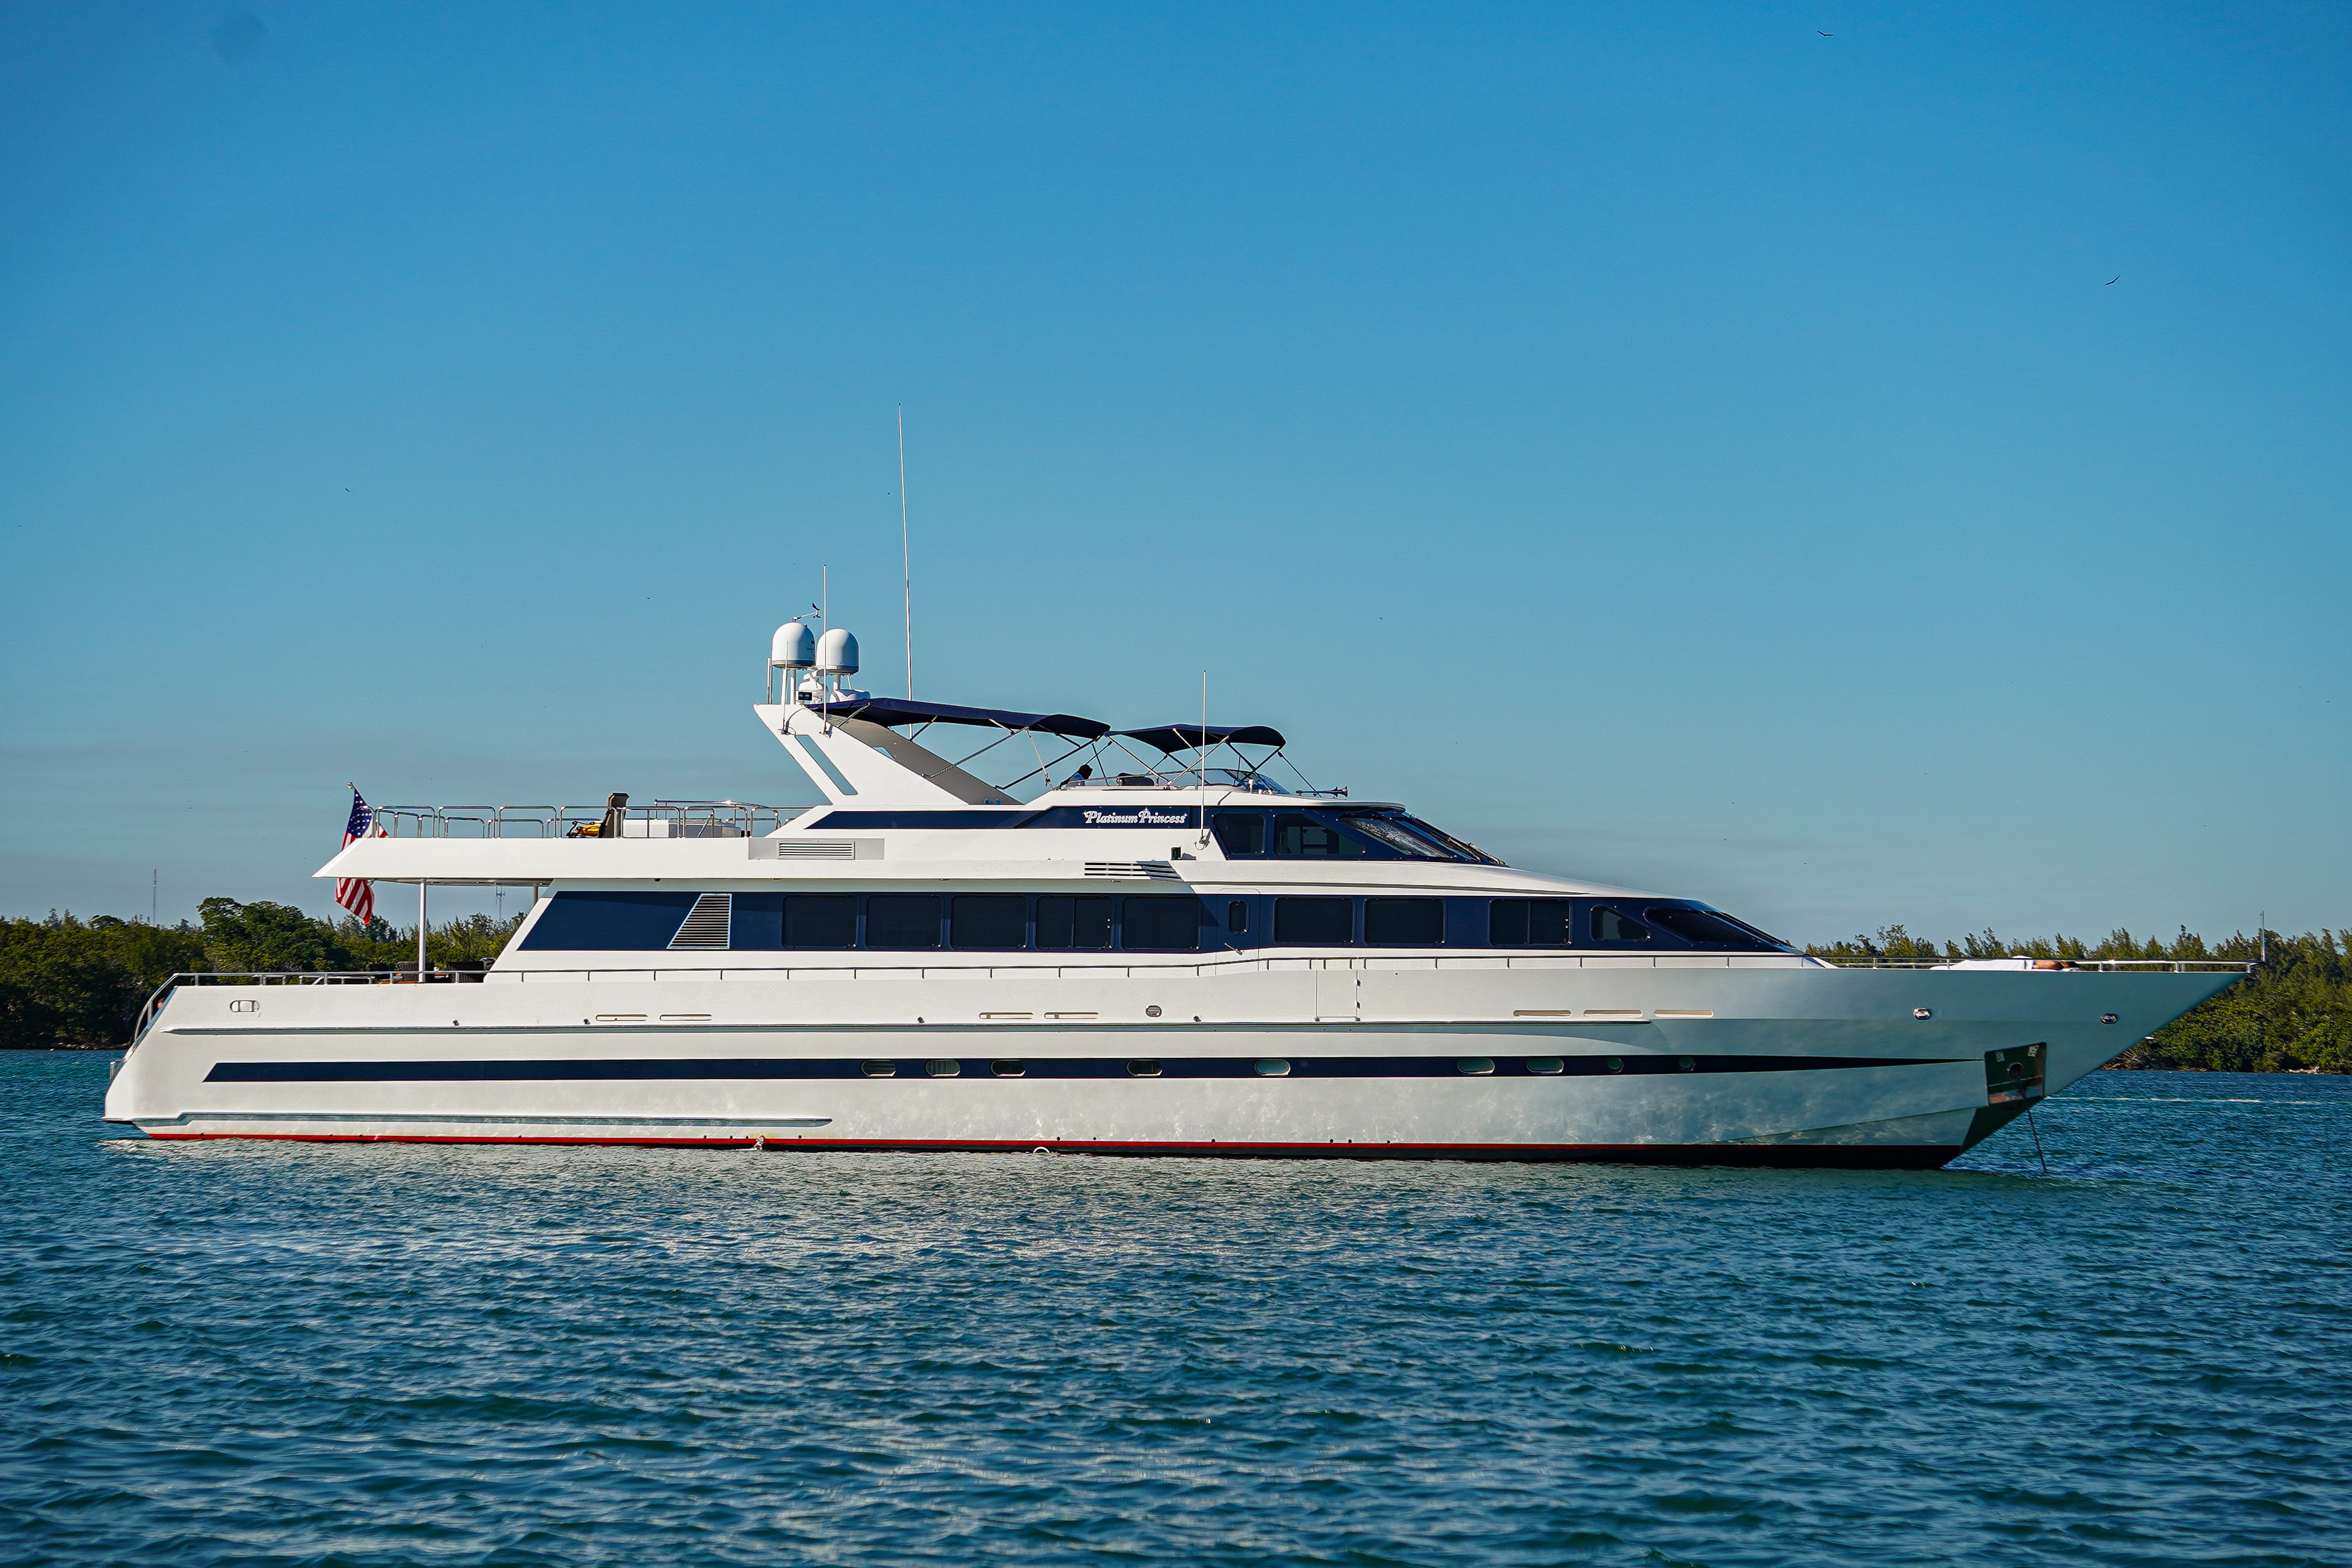 PLATINUM PRINCESS specs with detailed specification and builder summary